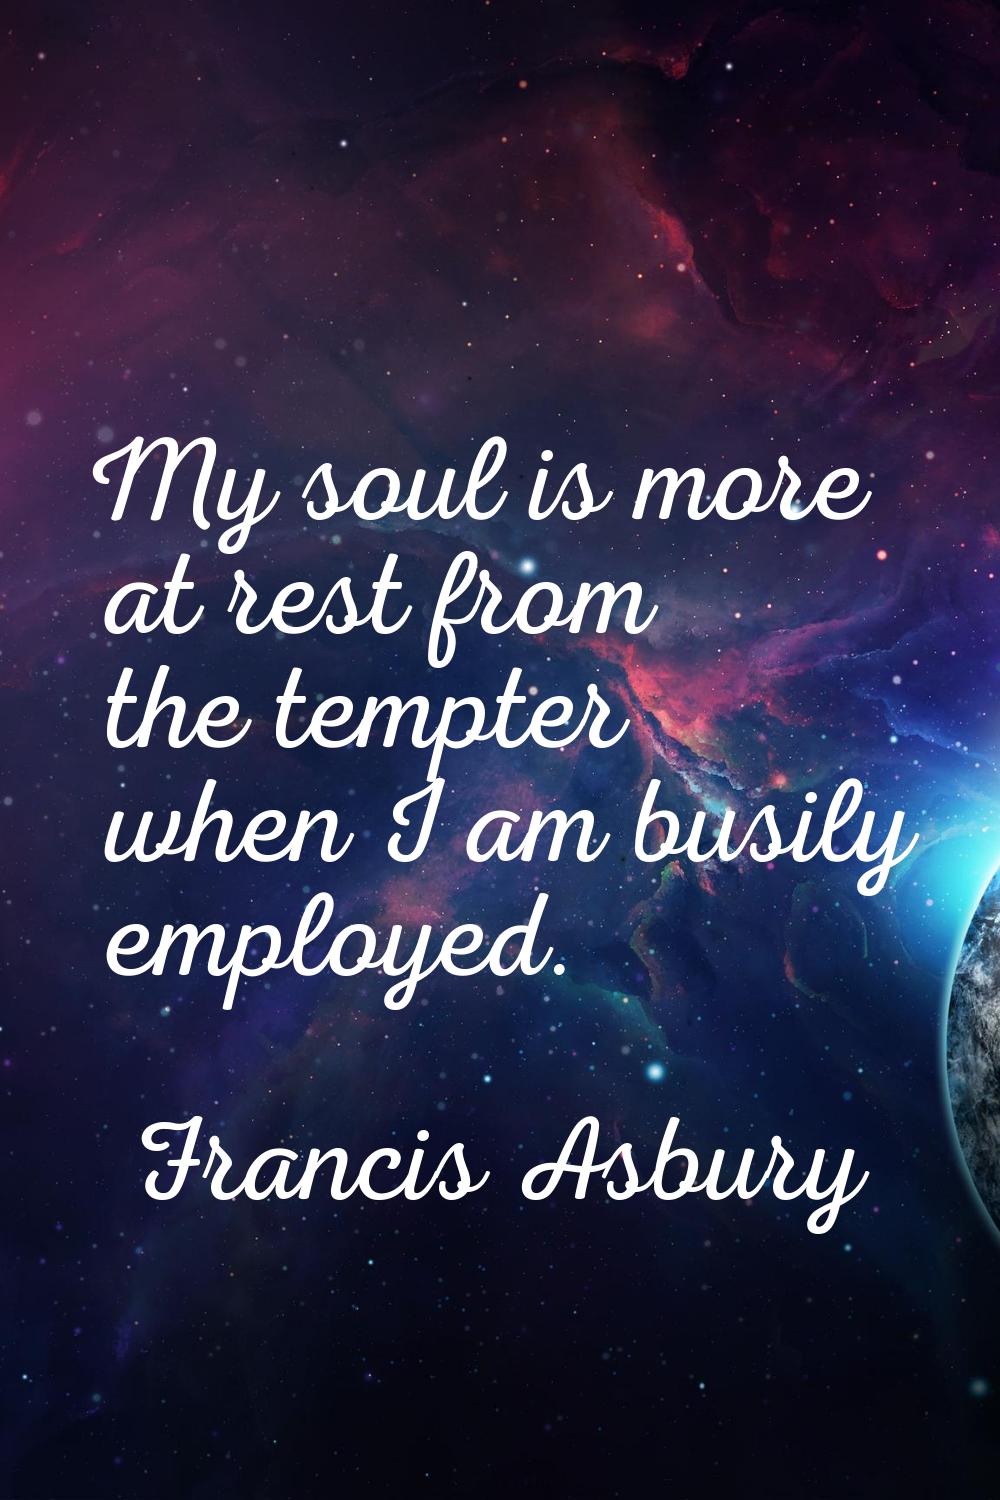 My soul is more at rest from the tempter when I am busily employed.